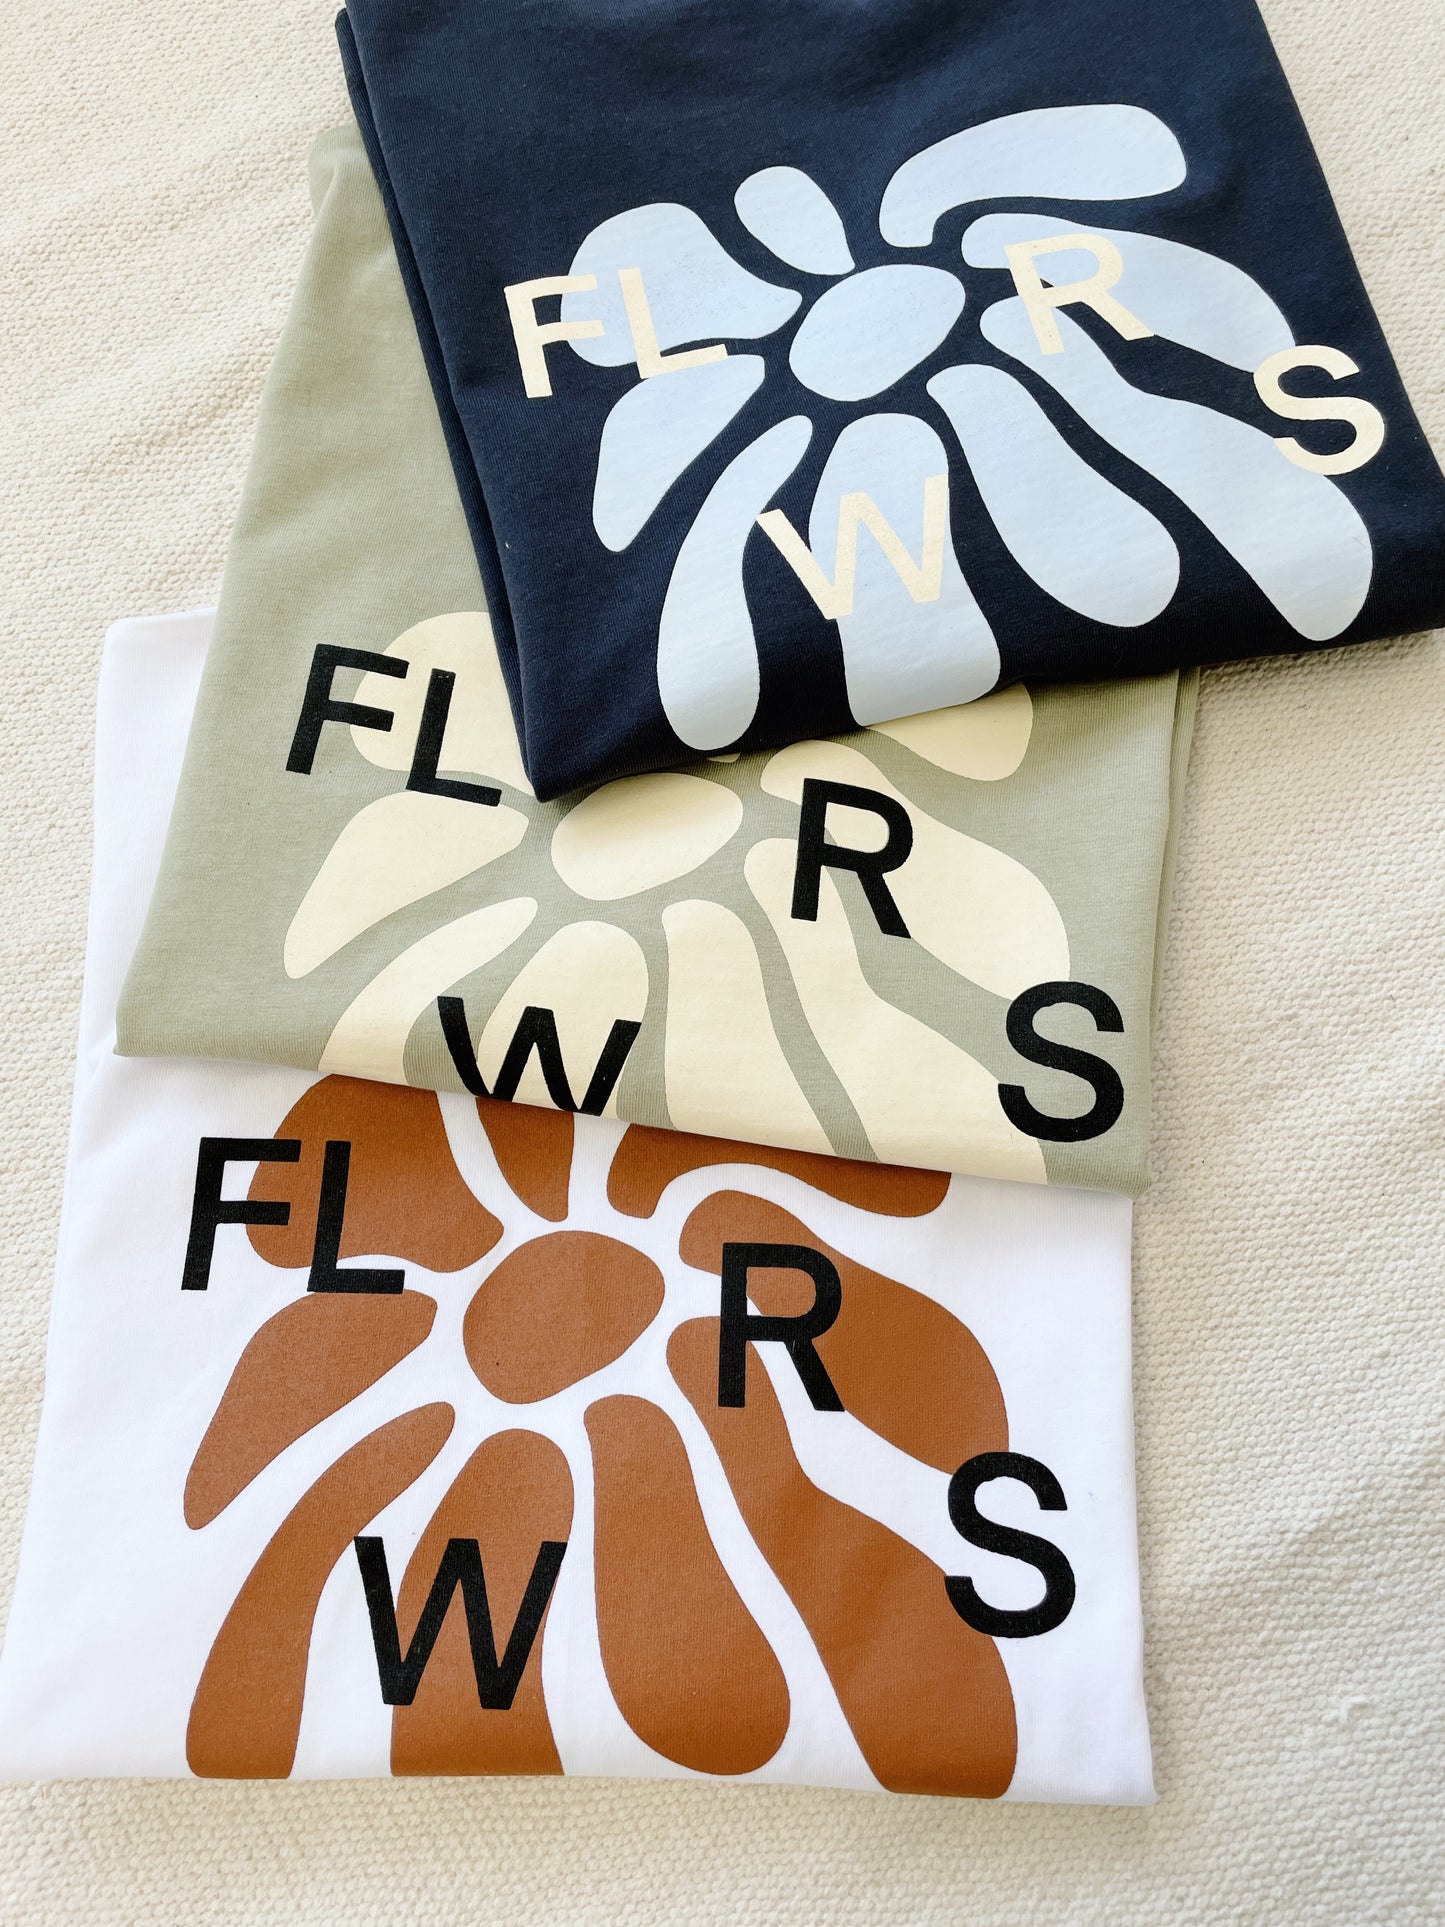 Load image into Gallery viewer, FLWRS Organic Boxy Tee - White
